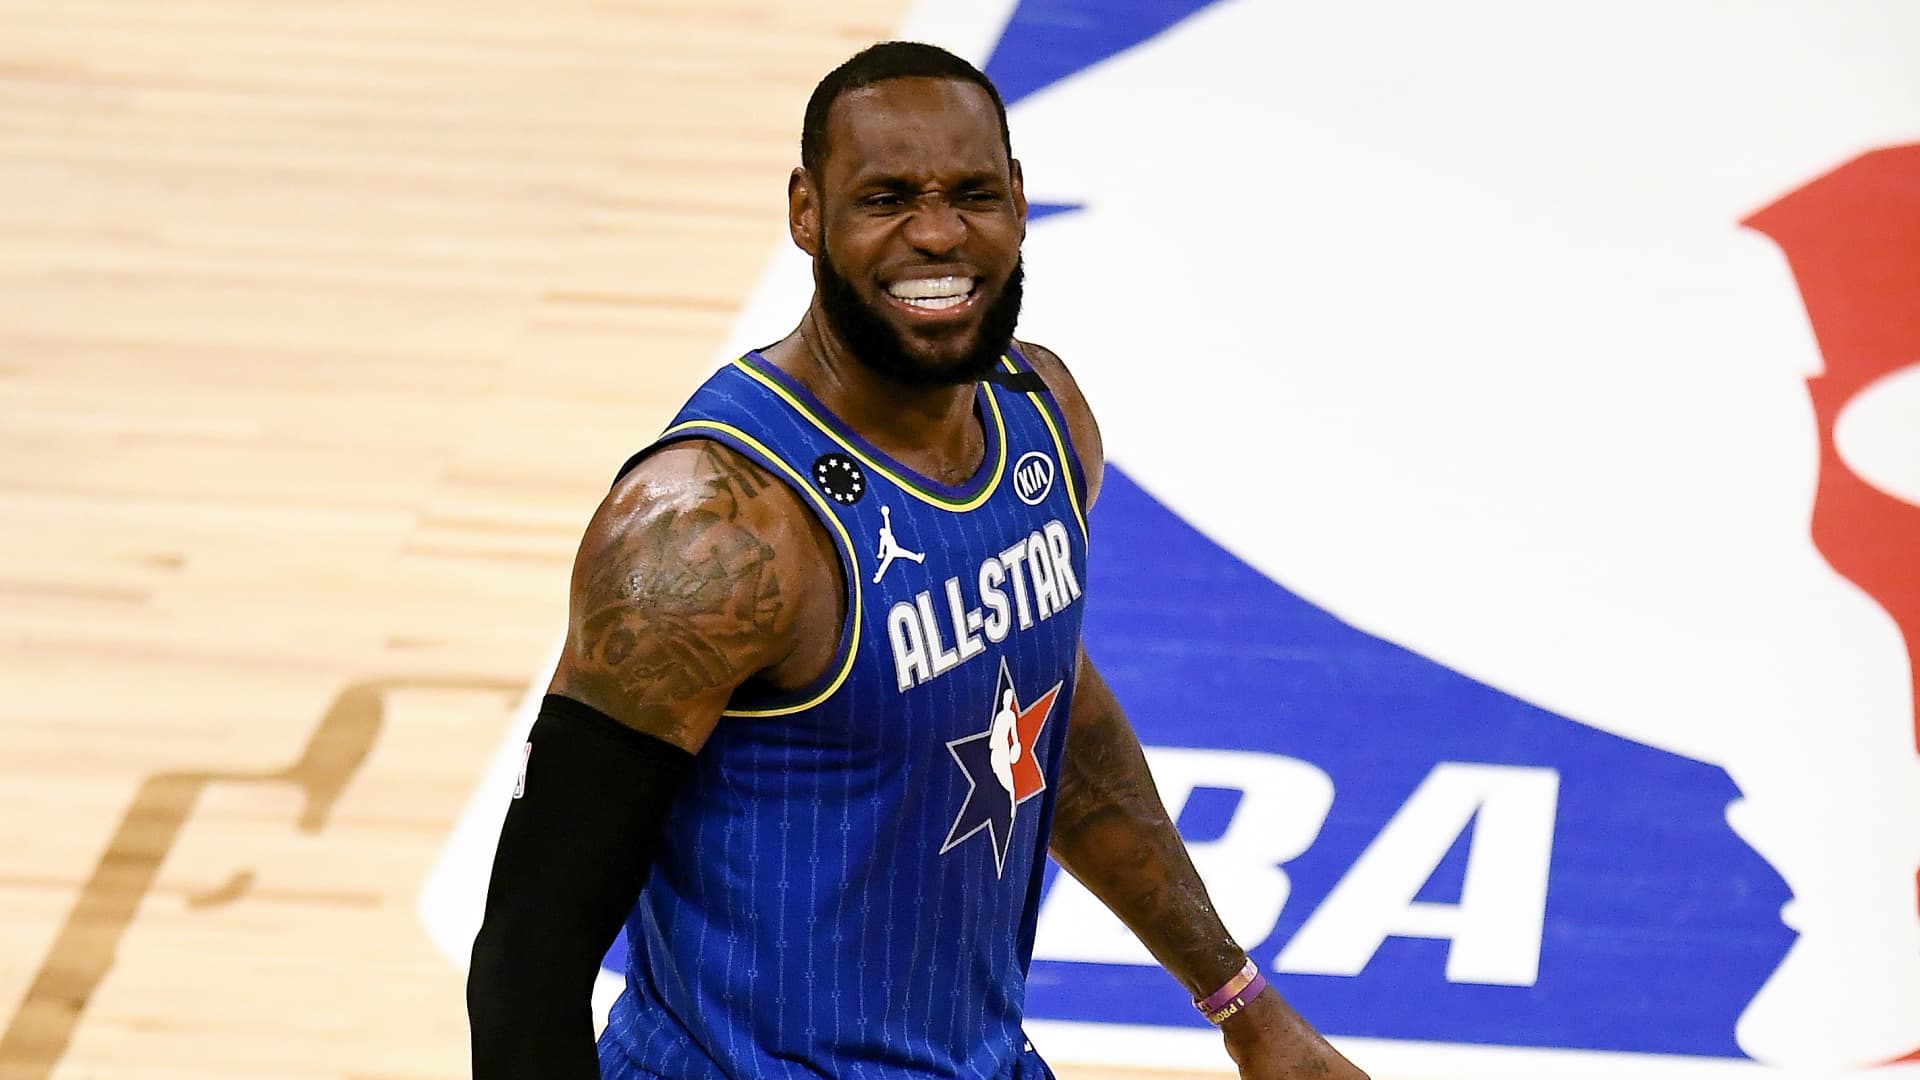 LeBron James #2 of Team LeBron celebrates after beating Team Giannis during the 69th NBA All-Star Game at the United Center on February 16, 2020 in Chicago, Illinois.